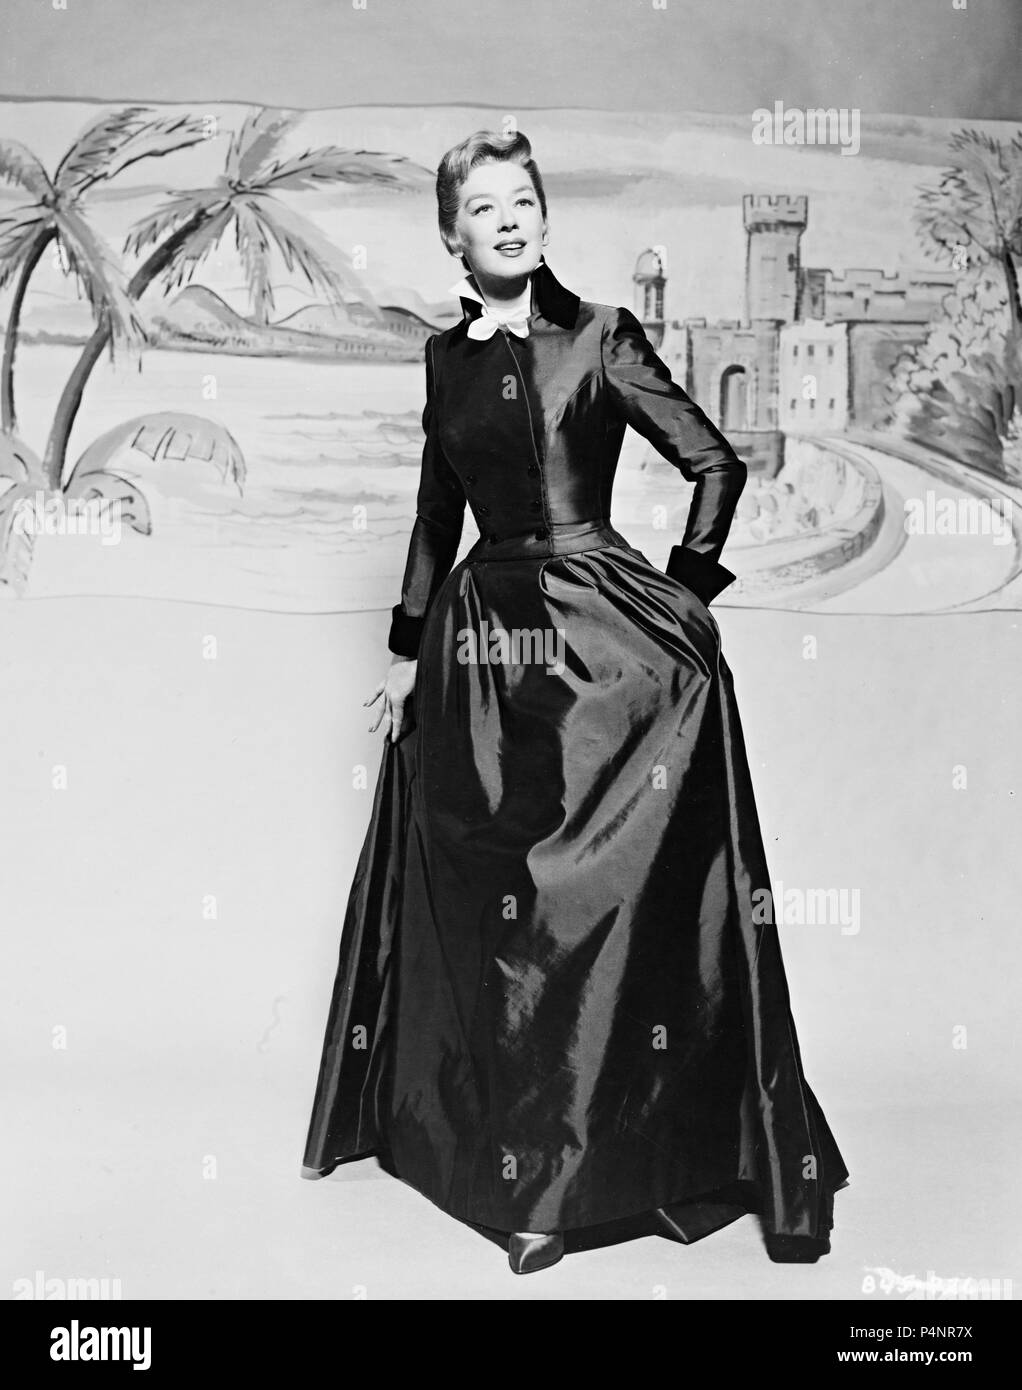 Original Film Title: AUNTIE MAME. English Title: AUNTIE MAME. Film  Director: MORTON DACOSTA. Year: 1958. Stars: ROSALIND RUSSELL. Credit:  WARNER BROTHERS / Album Stock Photo - Alamy